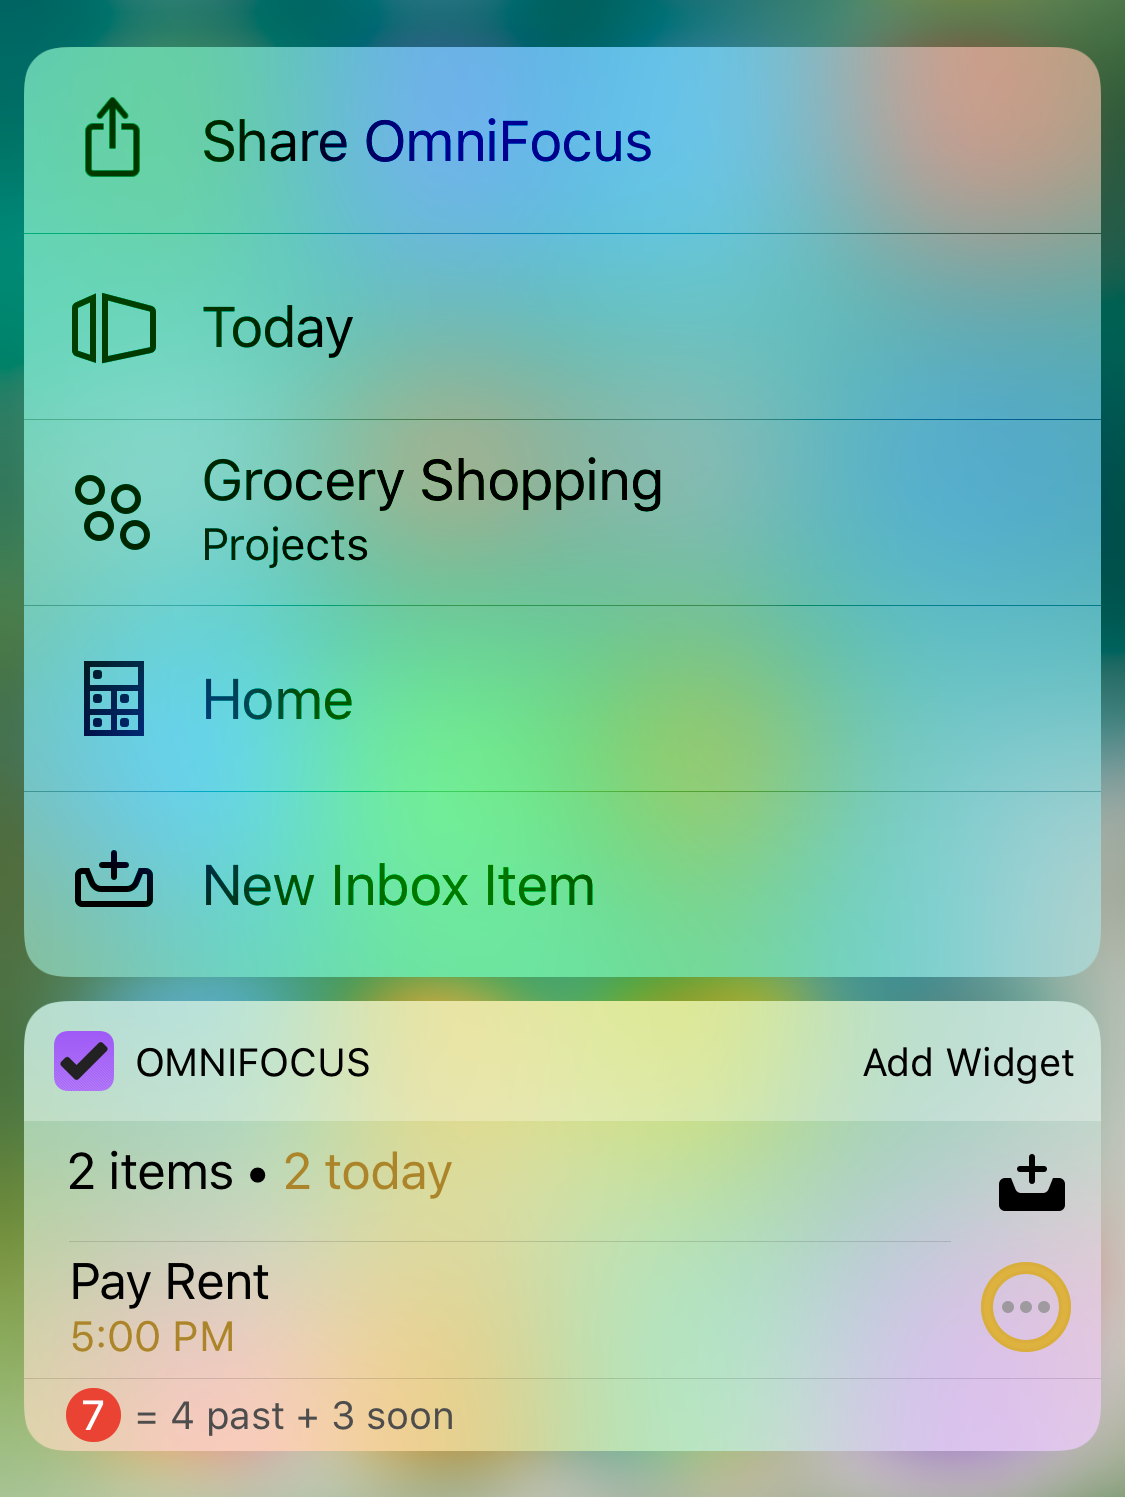 Quick actions from the OmniFocus app icon on the iOS Home screen.